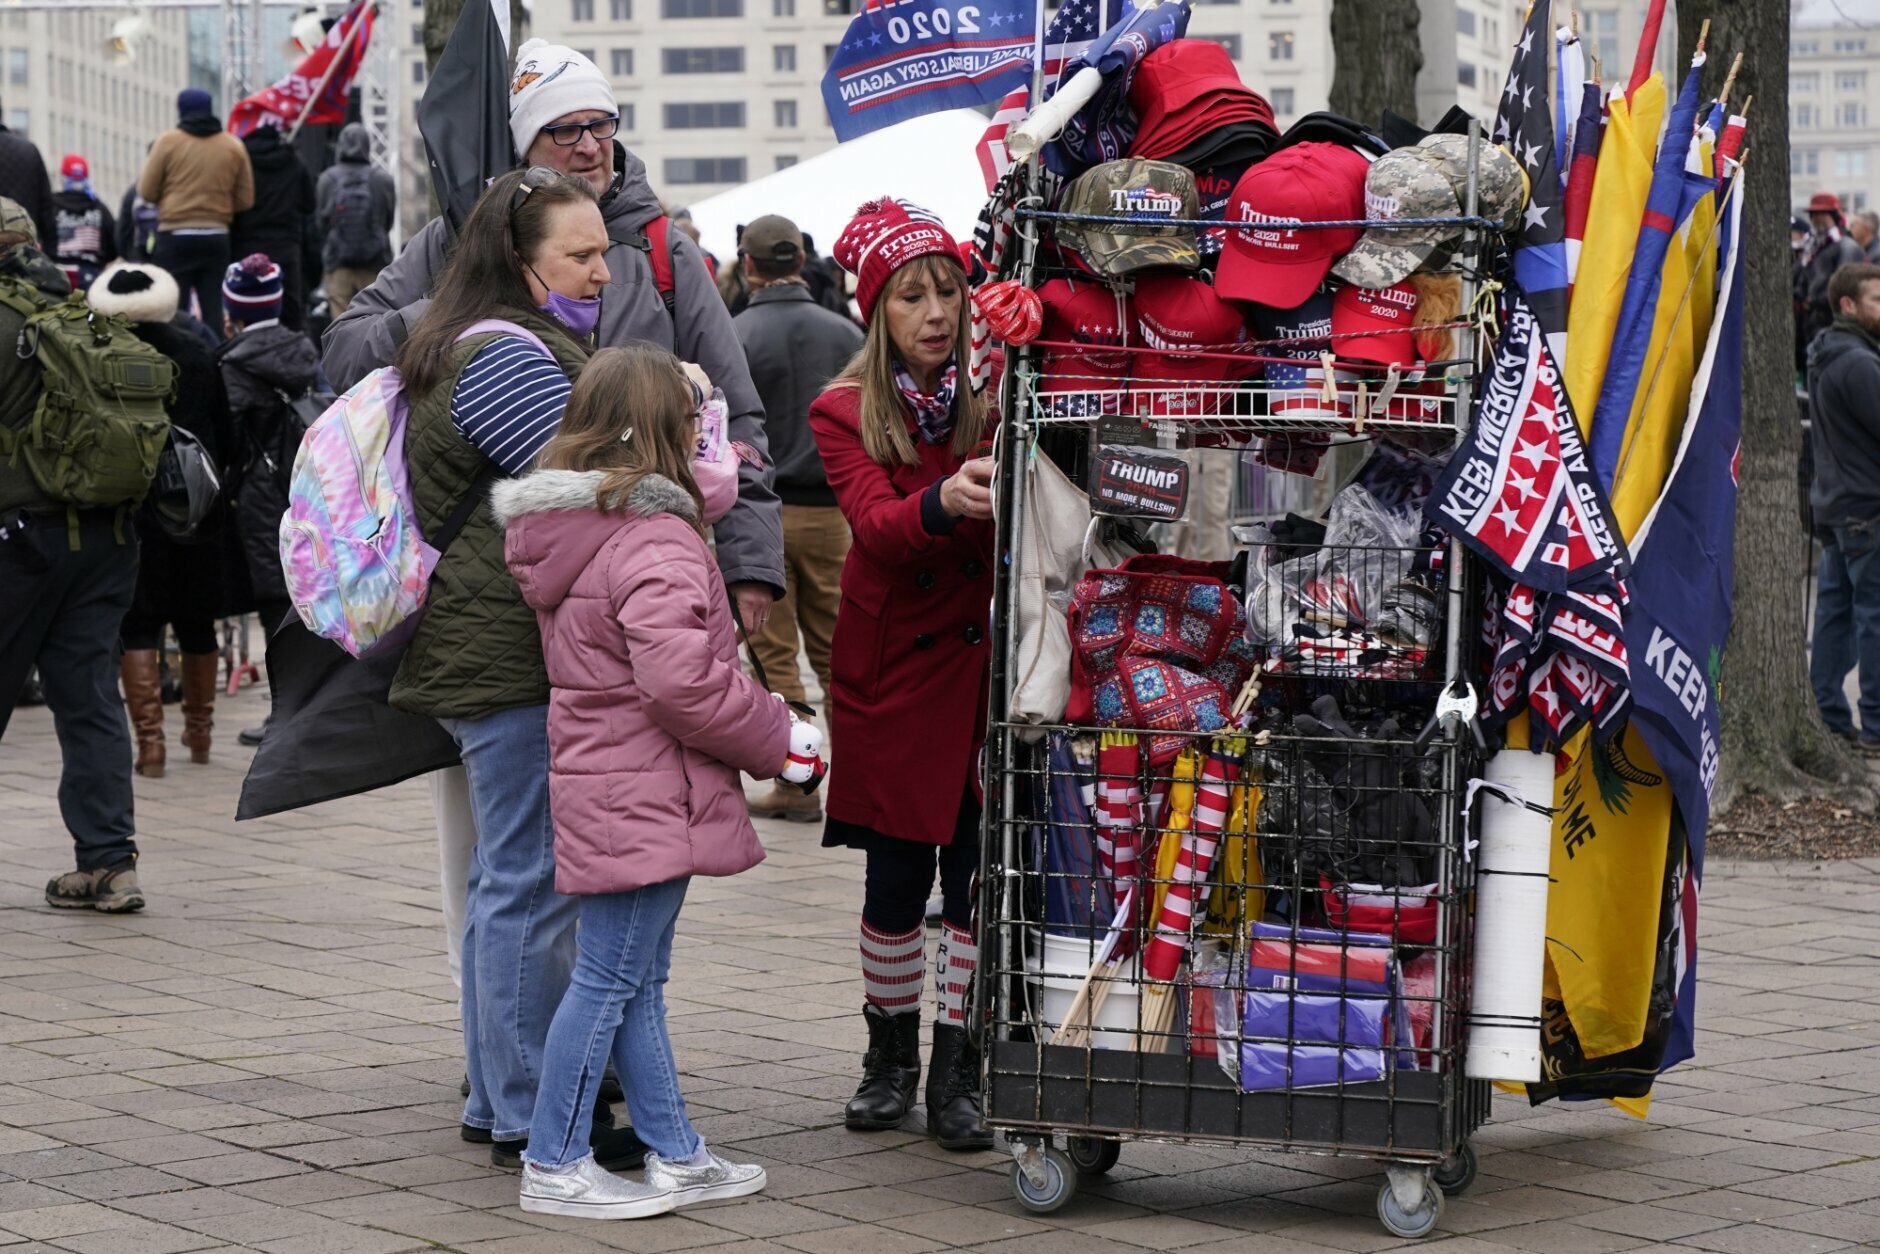 People attending a rally at Freedom Plaza Tuesday, Jan. 5, 2021, in Washington, in support of President Donald Trump, look at merchandise offered for sale by a vendor. (AP Photo/Jacquelyn Martin)